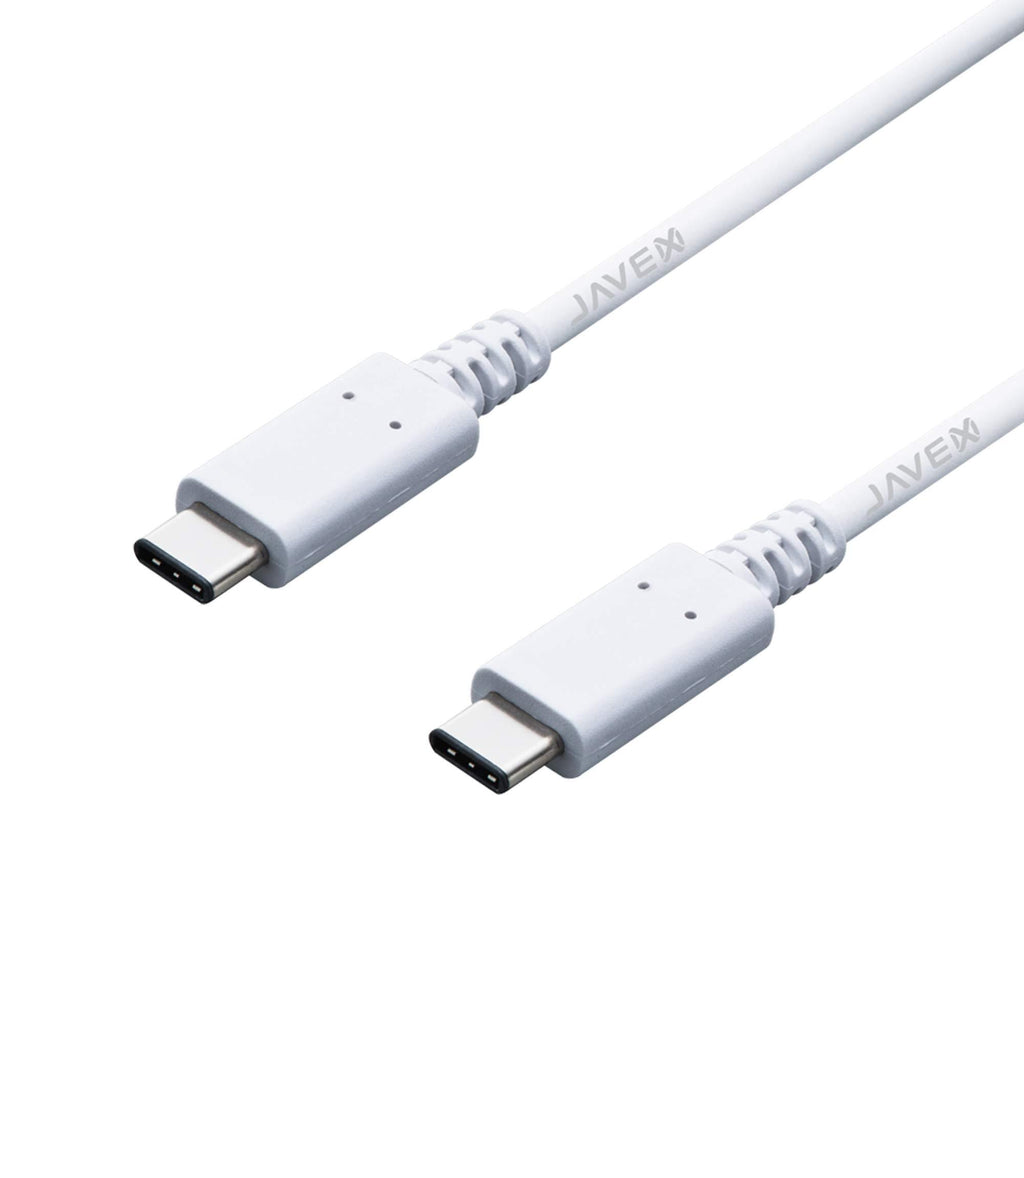 JAVEX [USB-IF Certified, E-Mark IC] USB Type-C to C Cable, 6 FT[1.8M], White